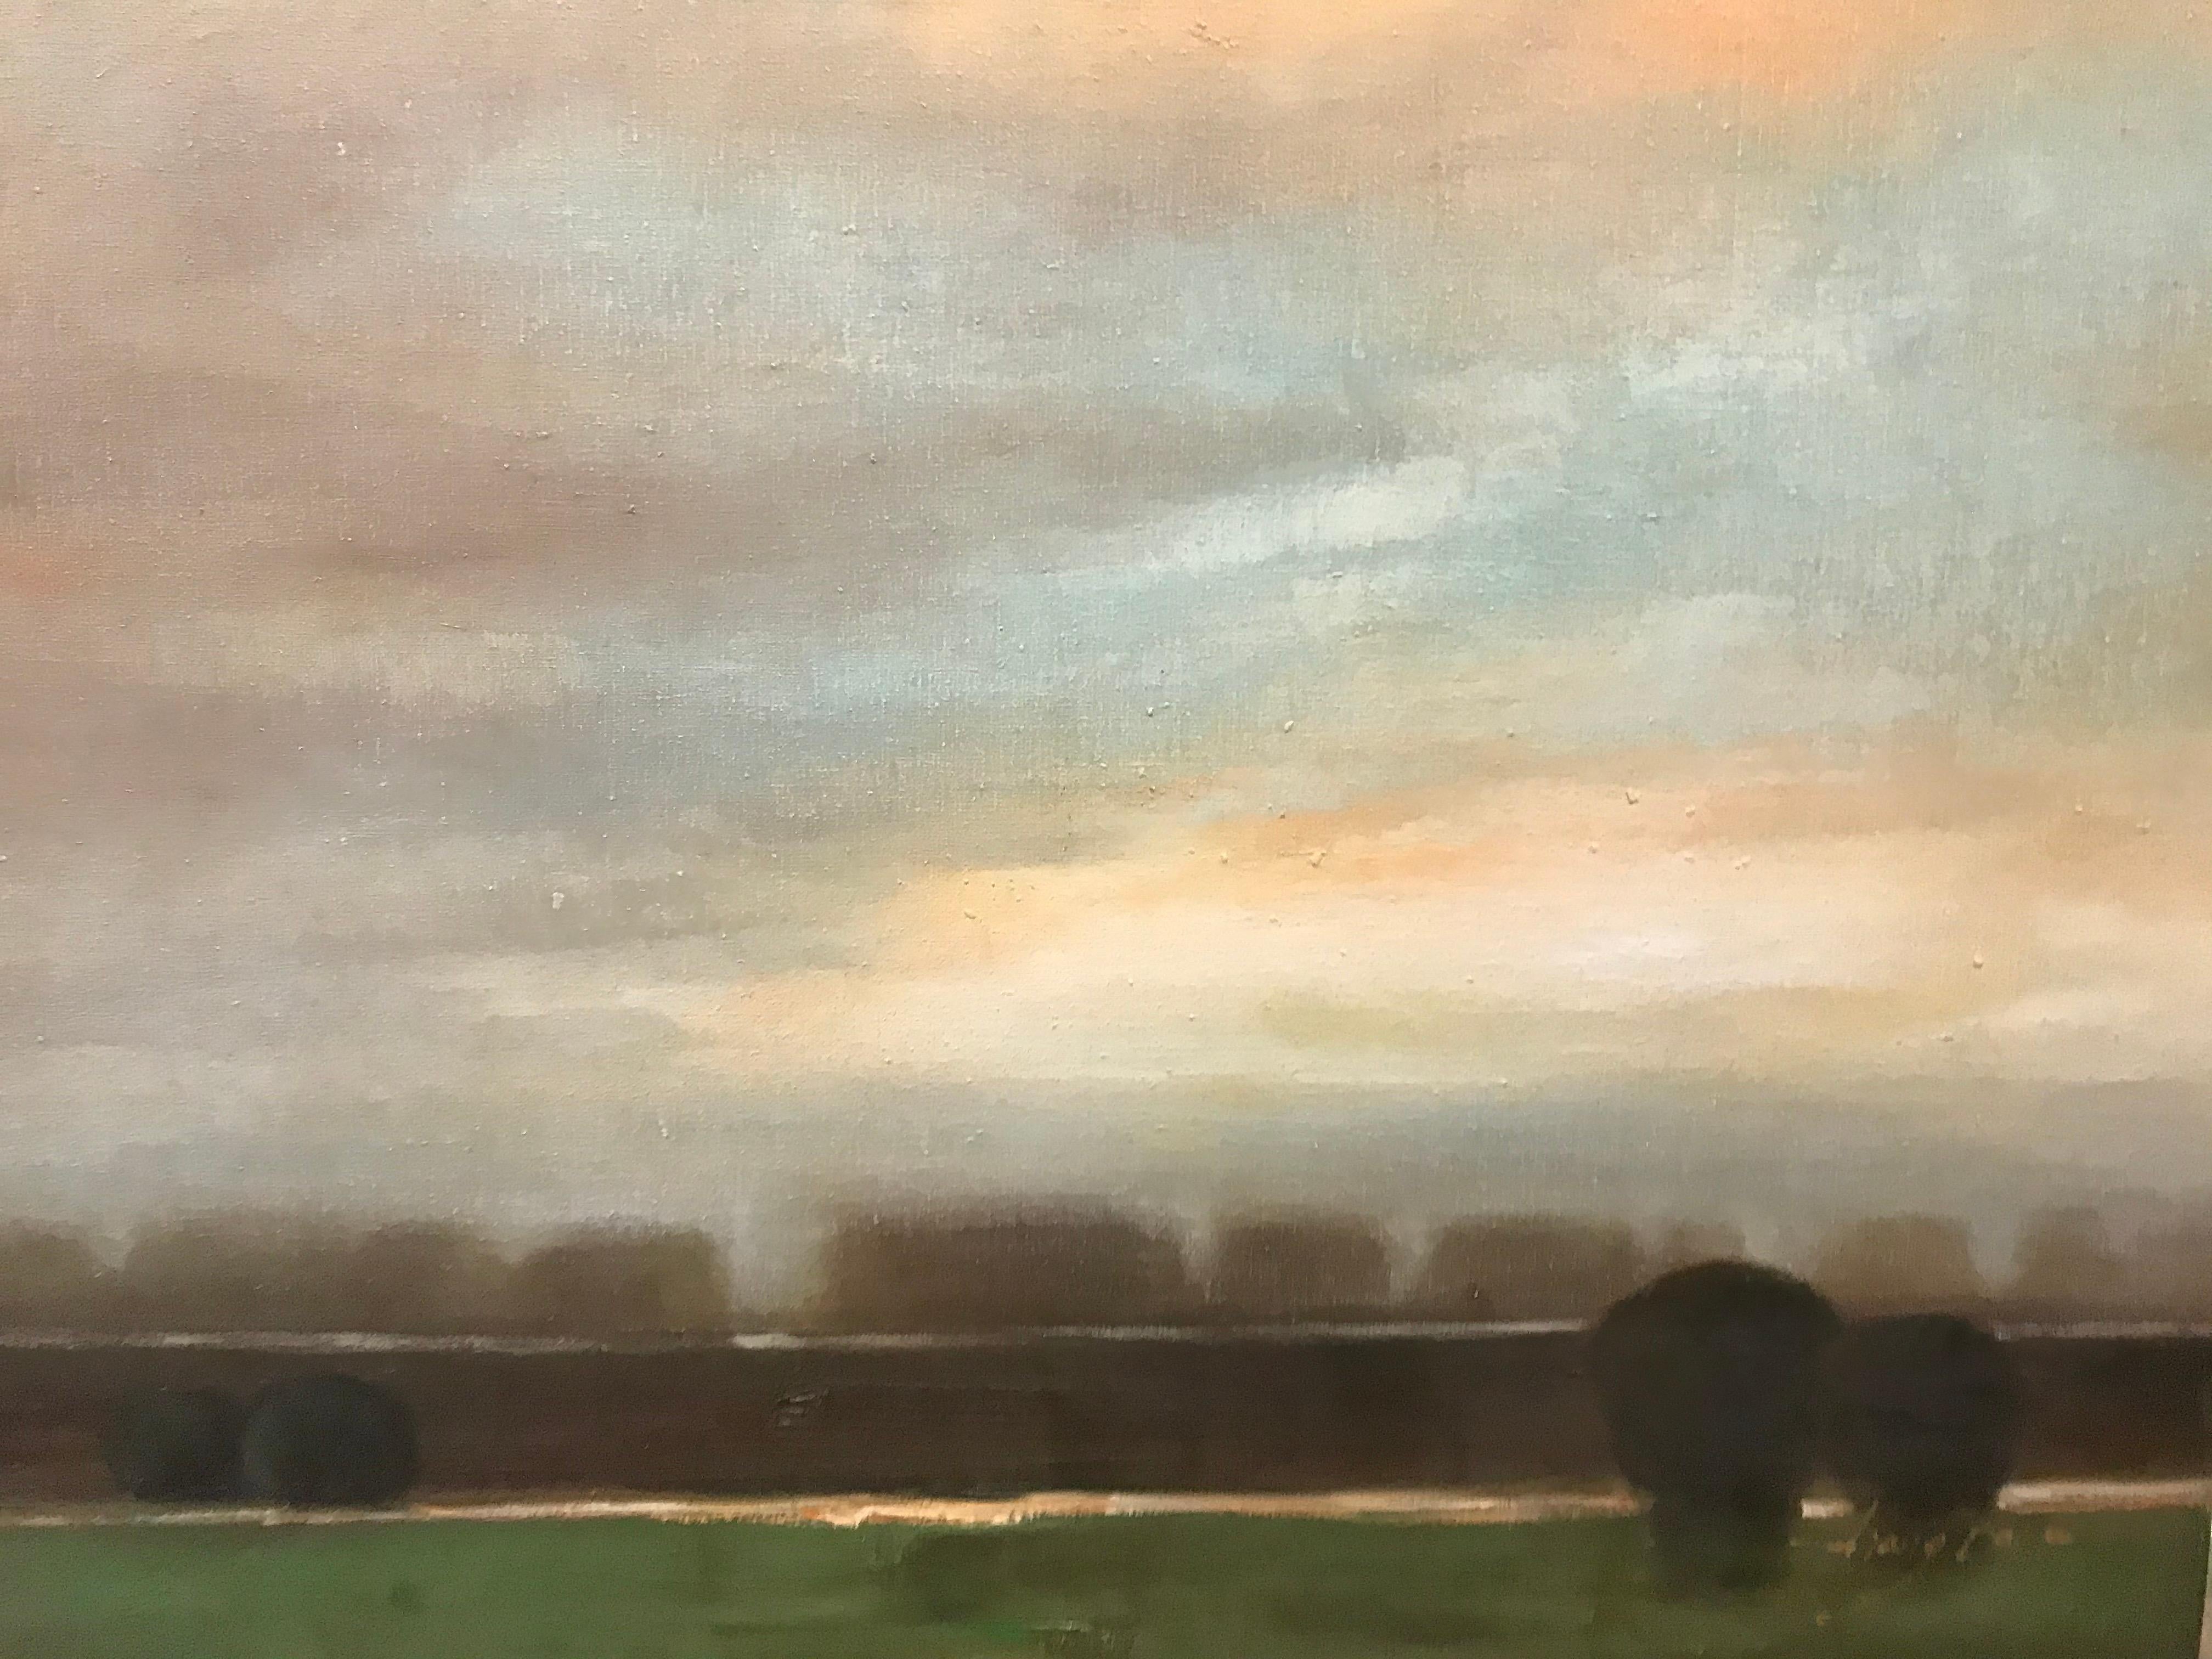 A stunningly rendered rendering of dawn in the countryside, with the sky as hero and subject. It is exceedingly difficult to capture the subtle tones of a morning sky such as this accurately, but the artist has done it with aplomb. It 